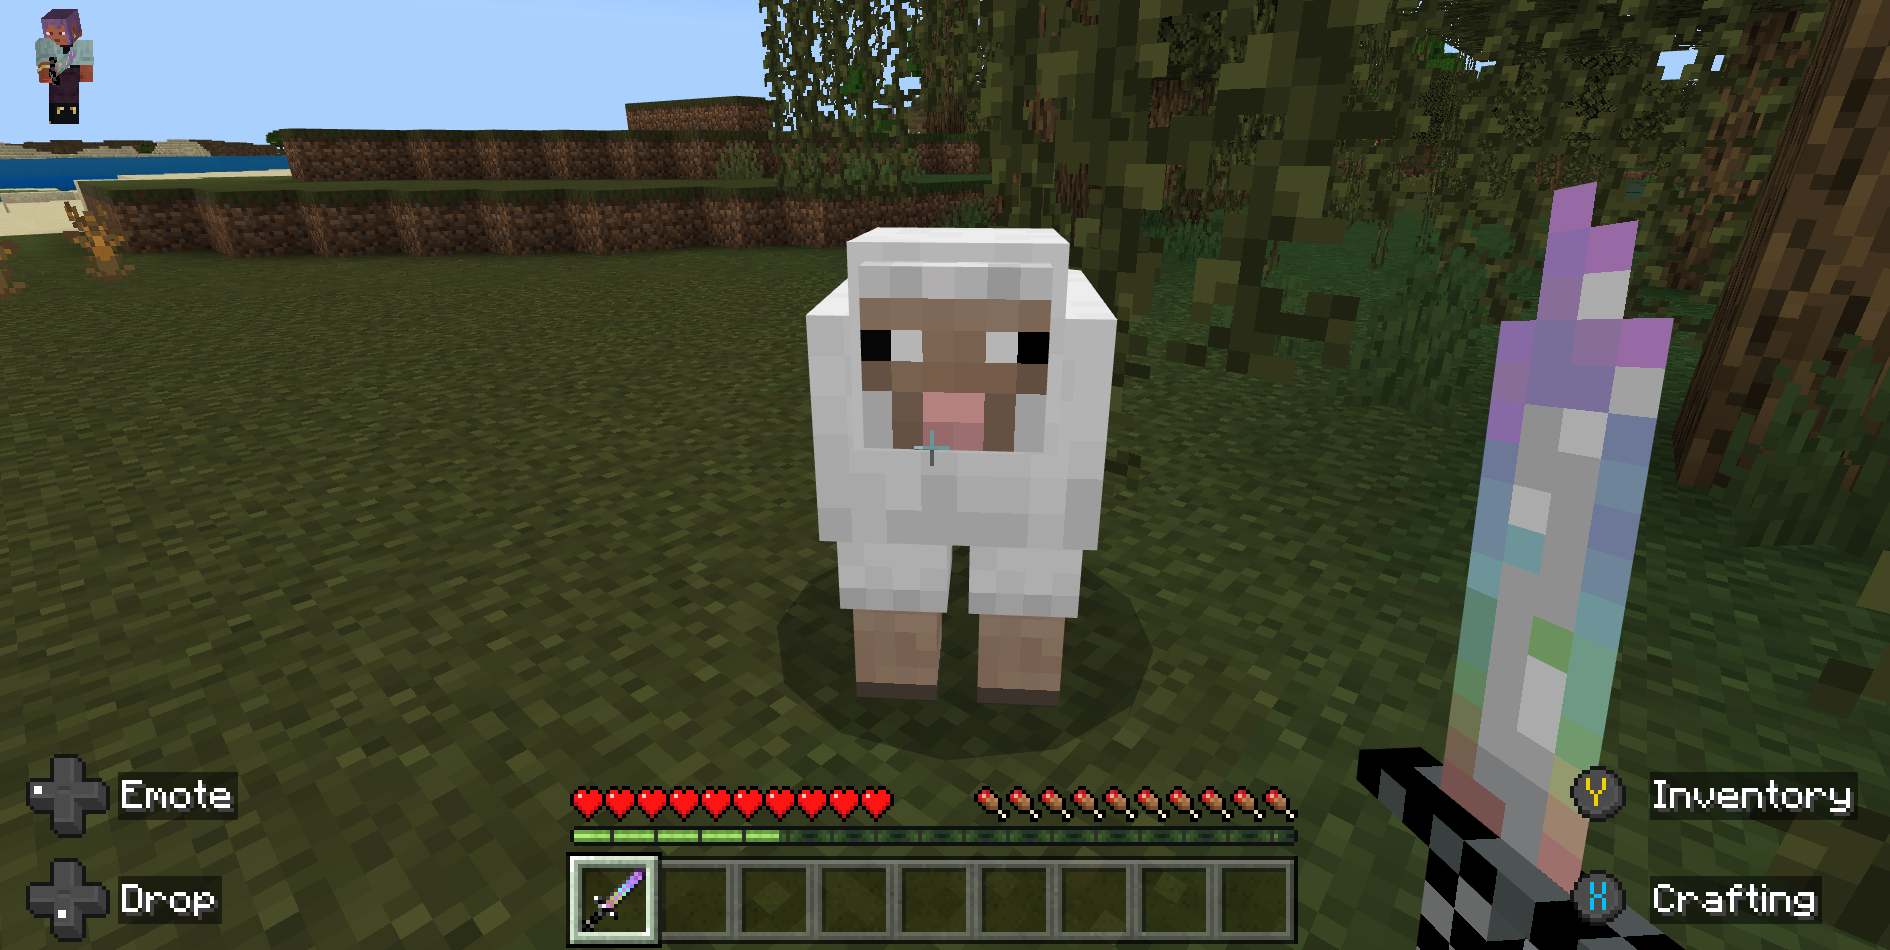 Image if a Minecraft world with the player holding a glass sword and in front of a sheep.